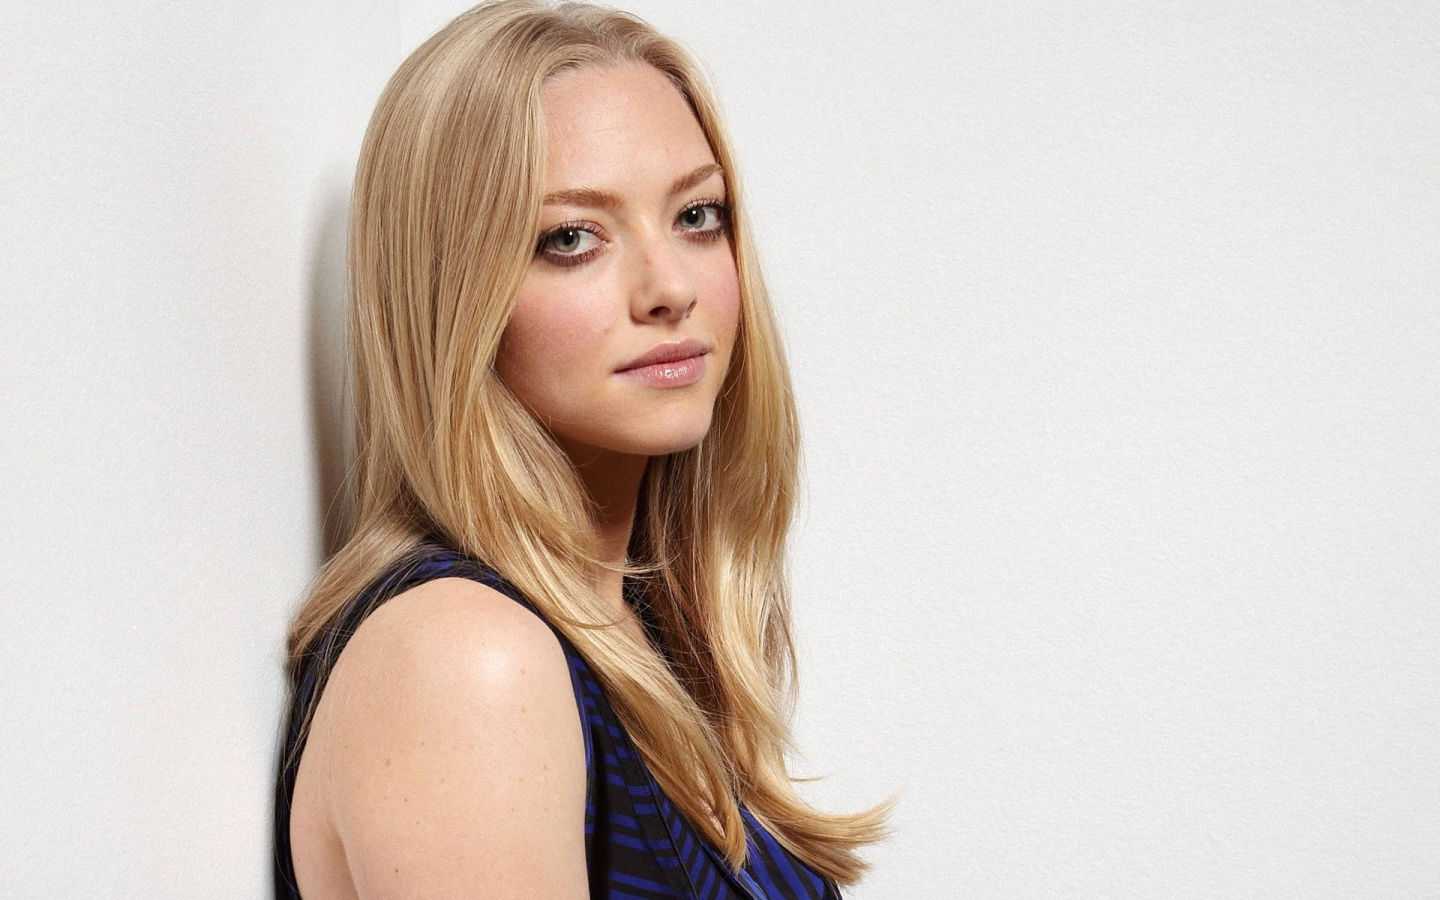 Amanda Seyfried Images And Pictures 7006 Hd Wallpapers ibwall.com